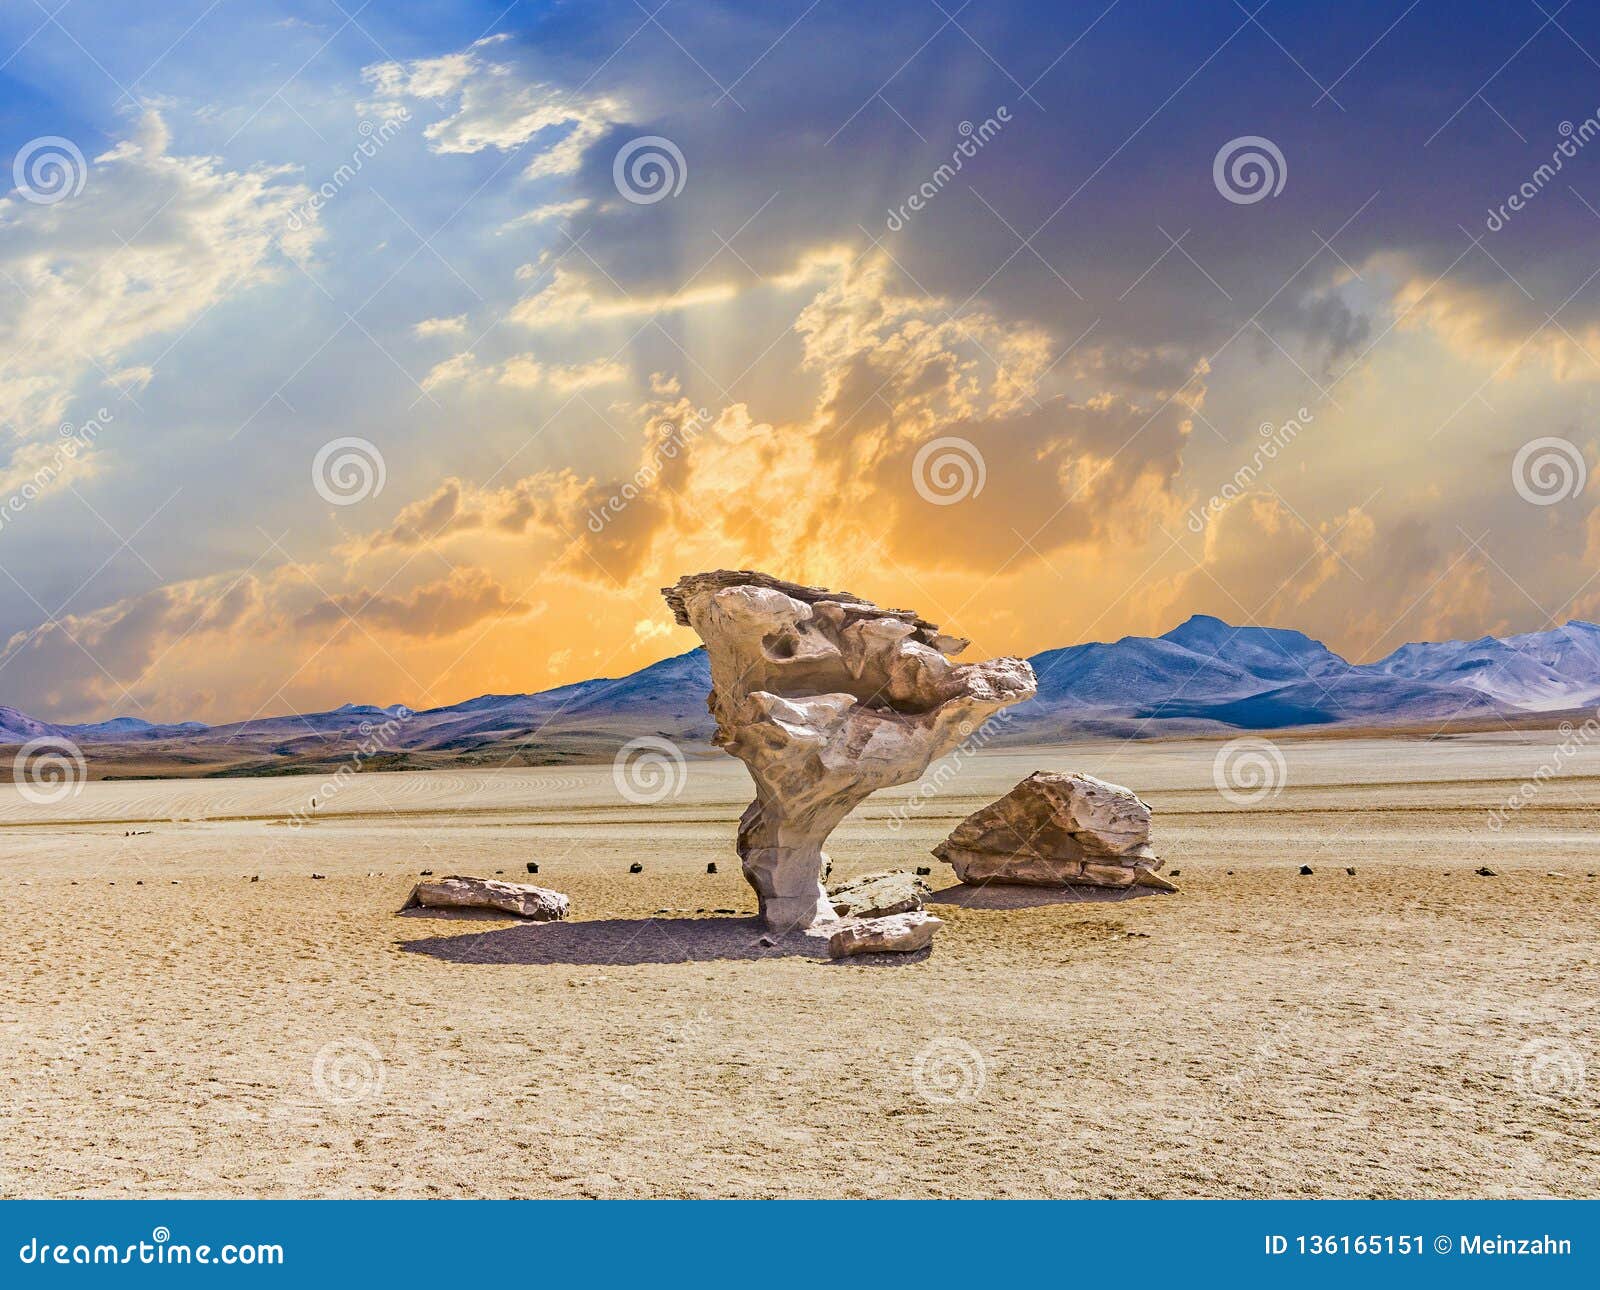 arbol de piedra (tree of rock), the famous stone tree rock formation created by wind, in the siloli desert in bolivia